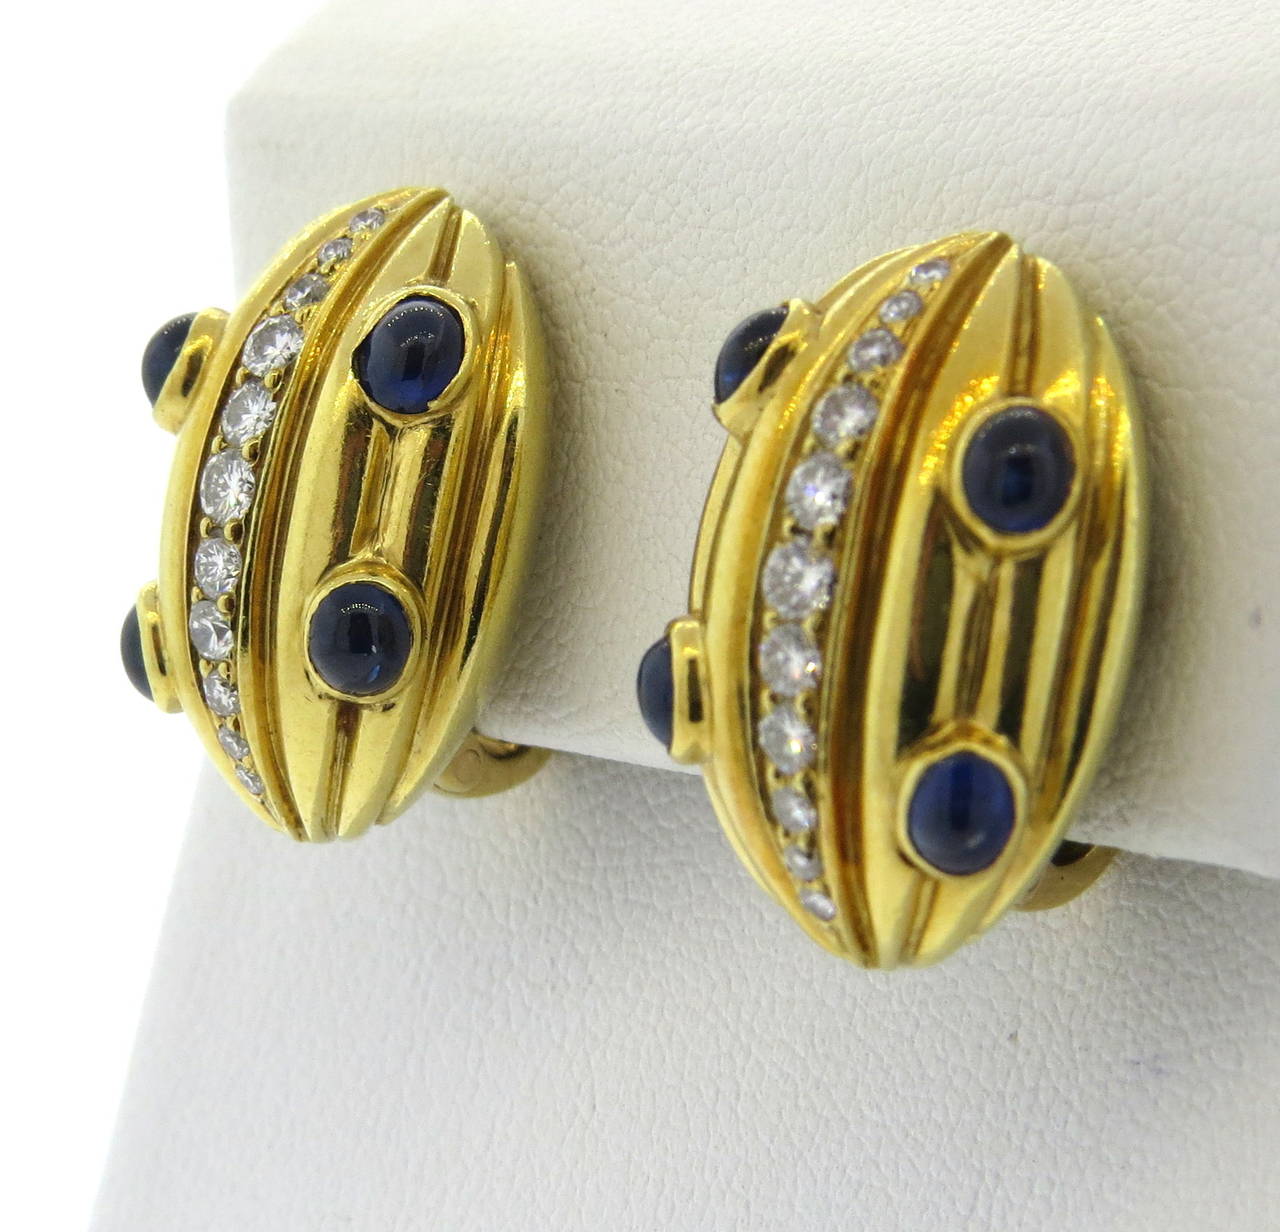 18k gold earrings with approx. 0.70ctw VS/G diamonds and sapphire cabochons. Earrings measure 21mm x 16mm. Weight - 19.6 grams